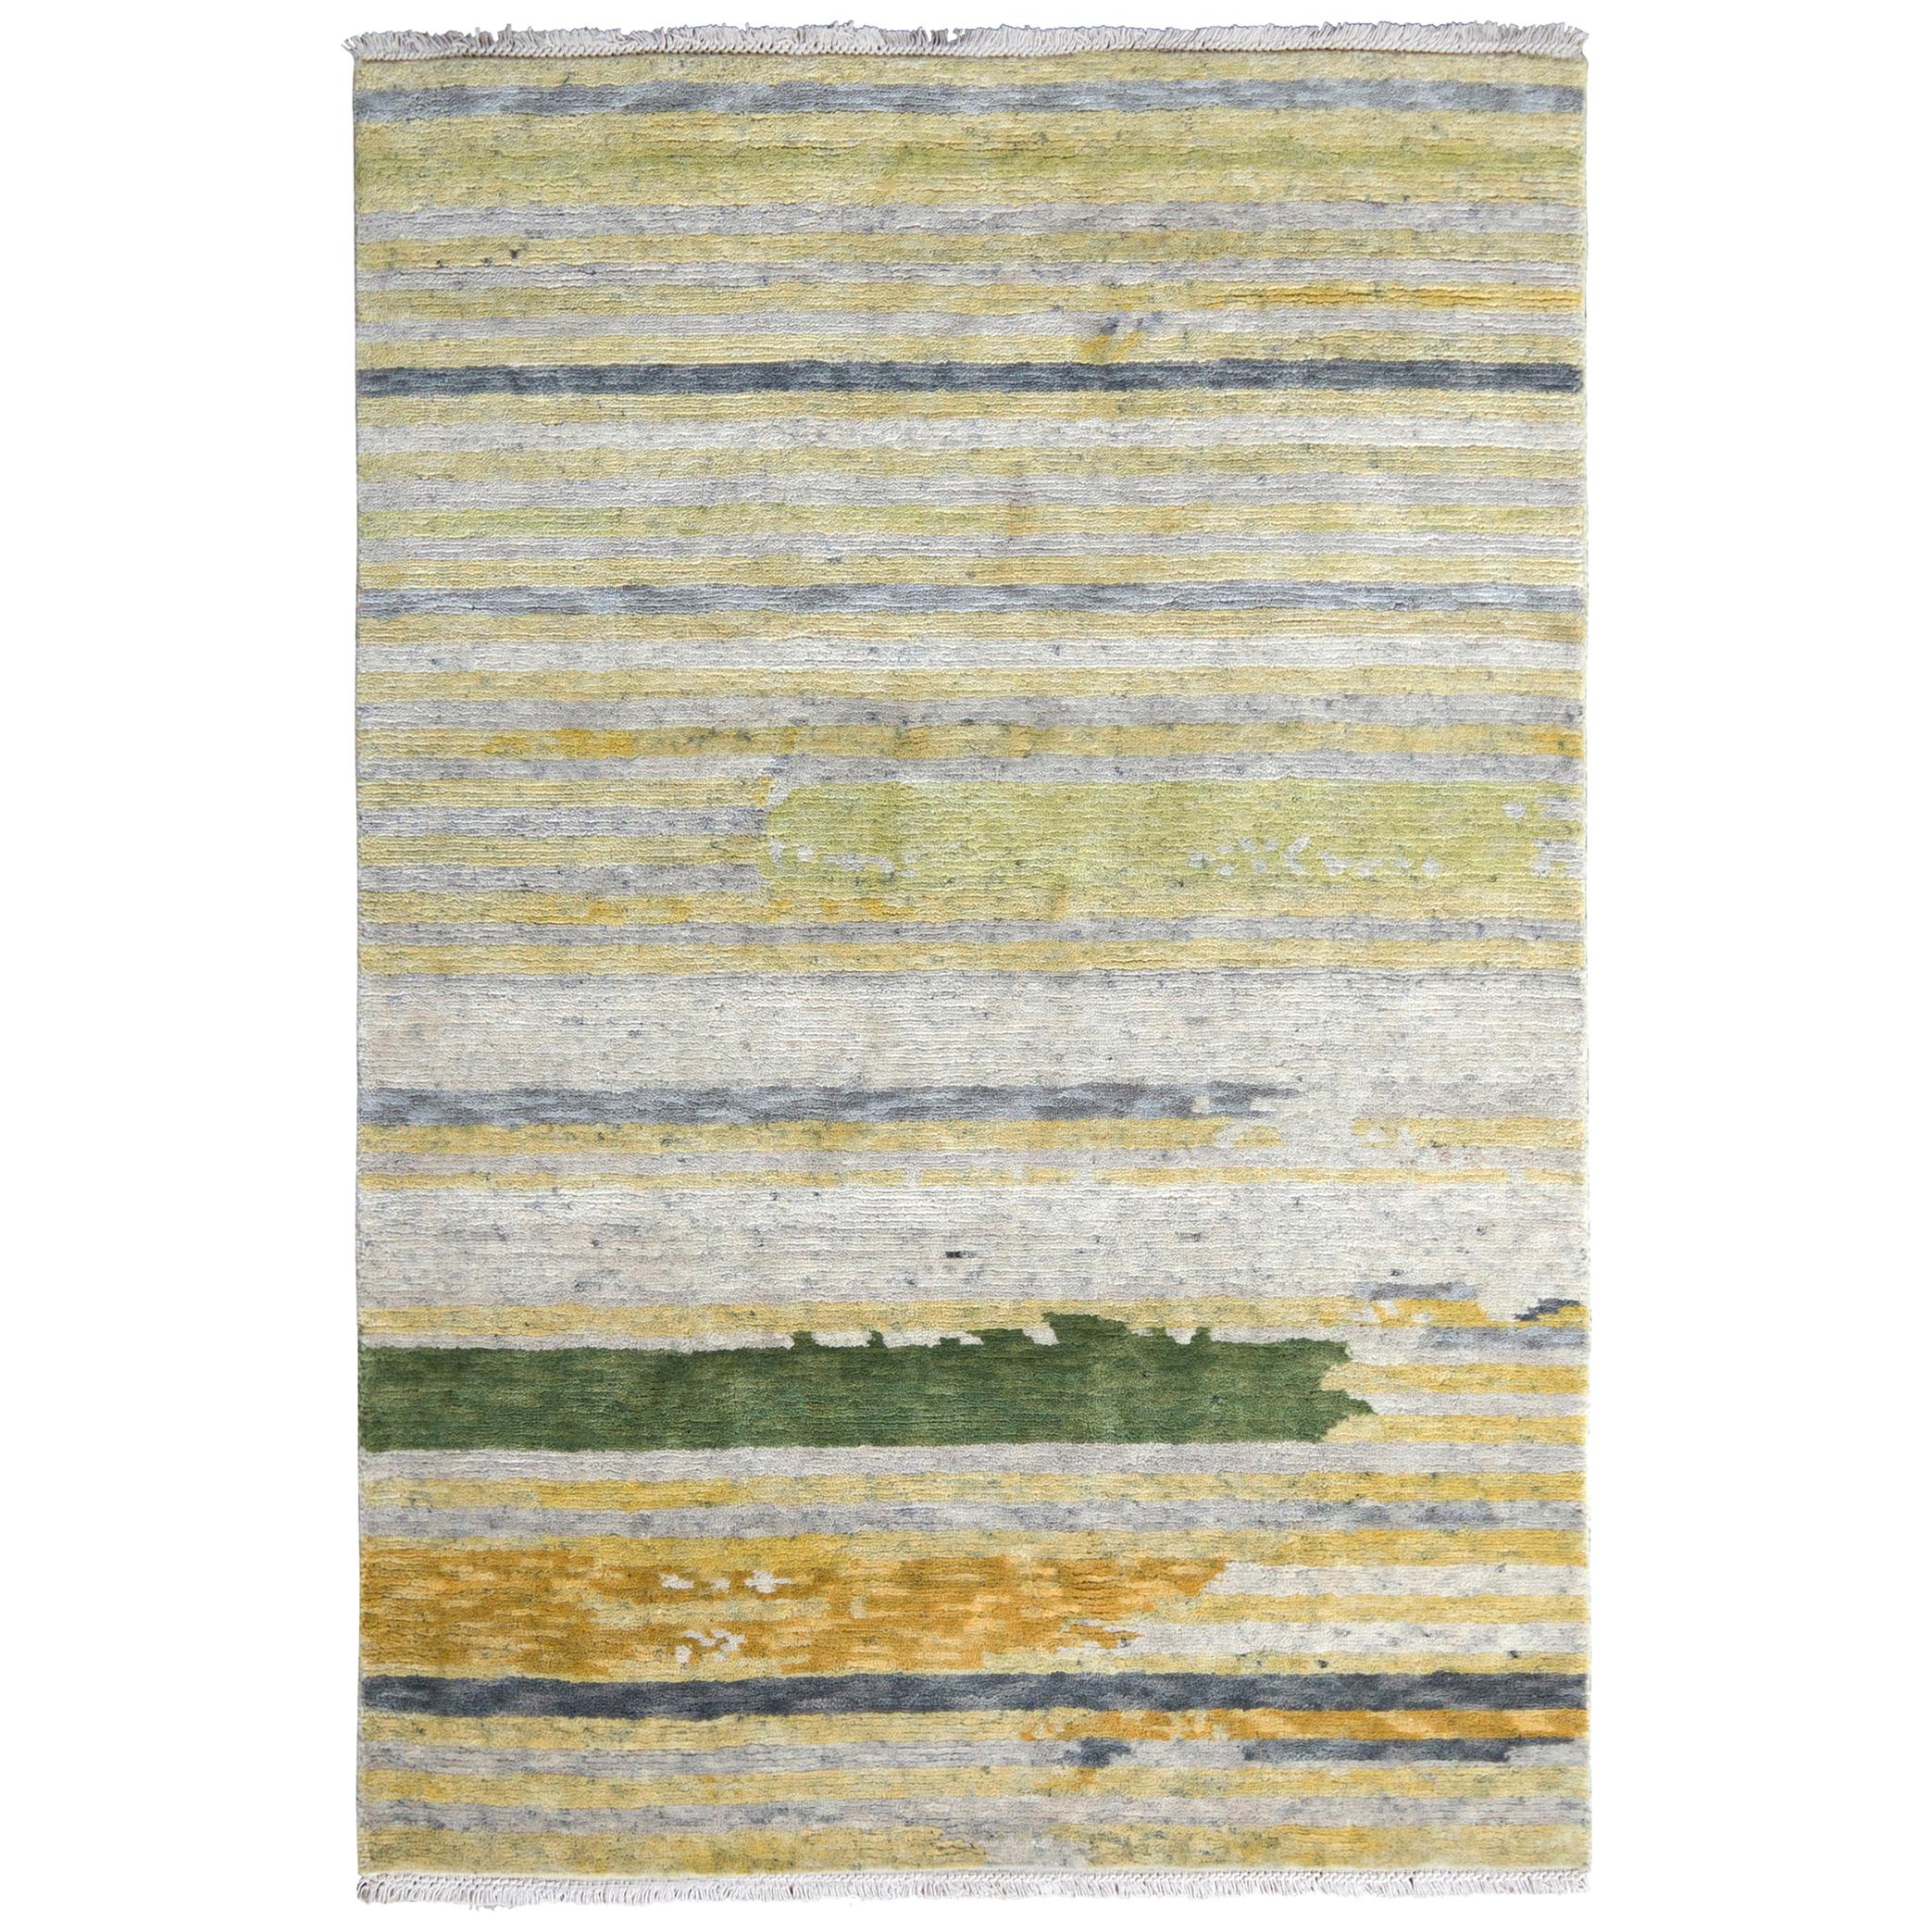 Rug & Kilim's Hand Knotted Modern Rug in Green Gray and Gold Striped Pattern